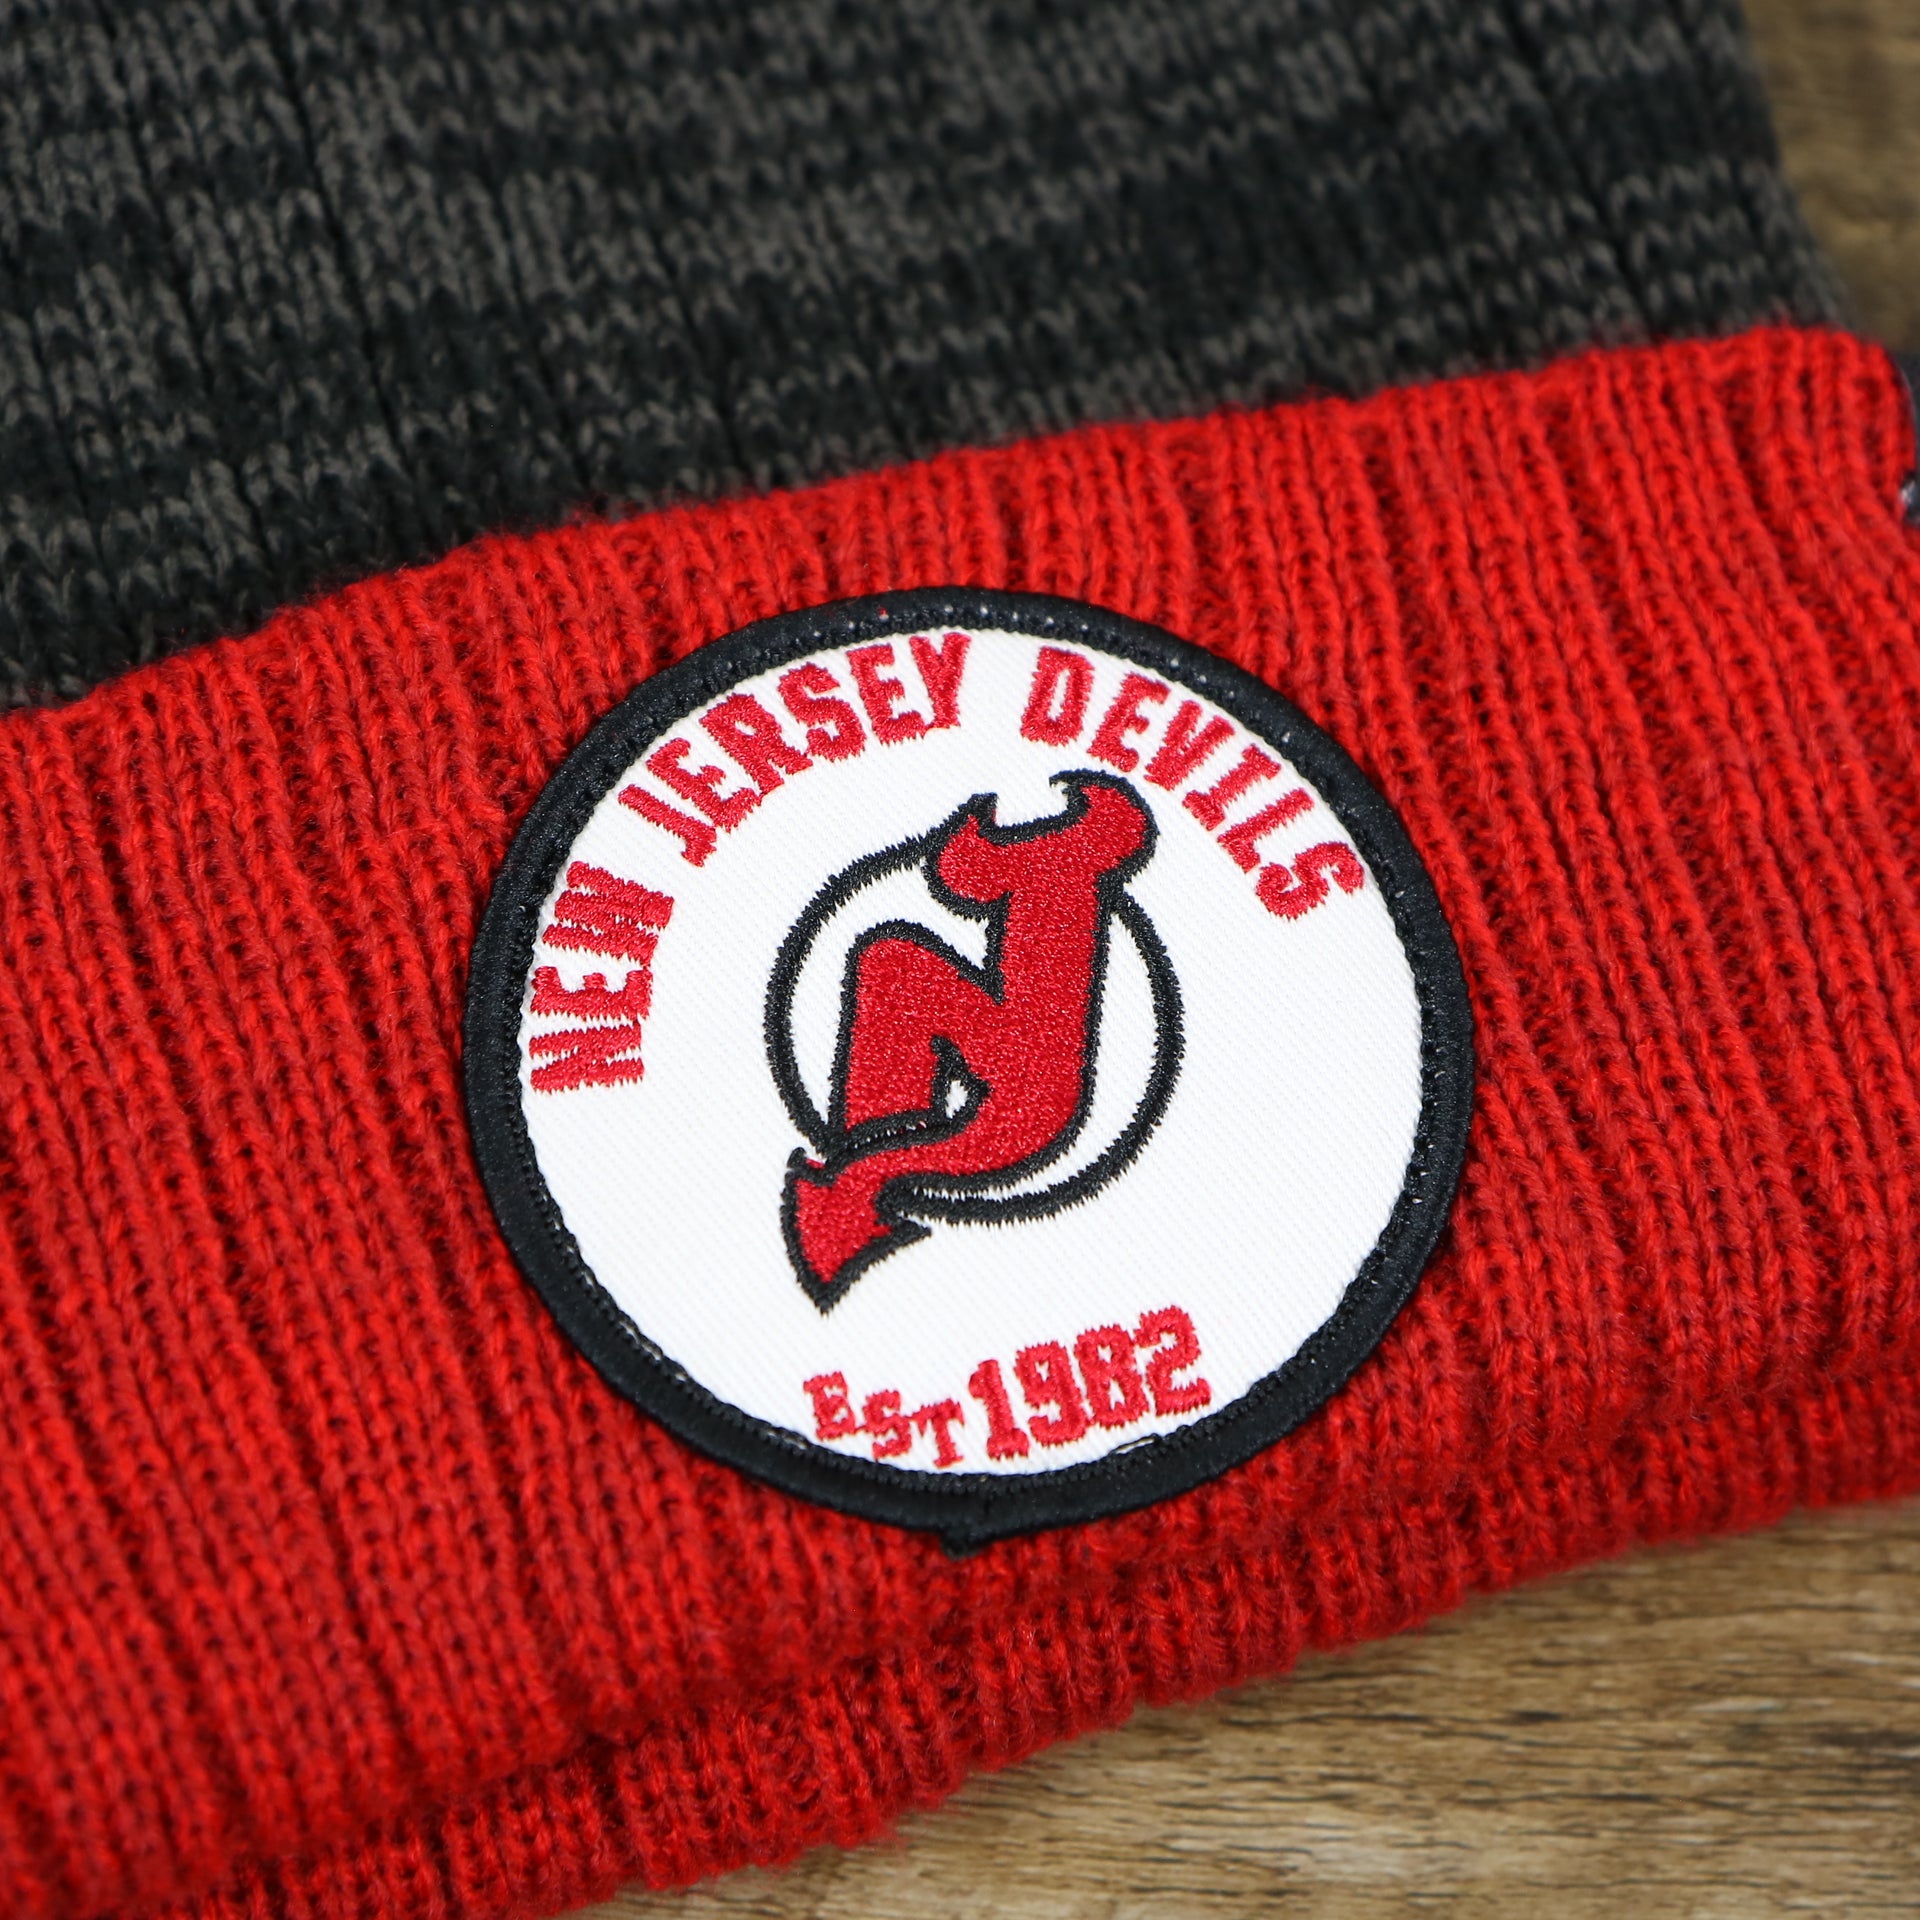 The New jersey Devils Logo on the New Jersey Devils Cuffed Logo Striped Winter Beanie With Pom Pom | Red and Gray Winter Beanie